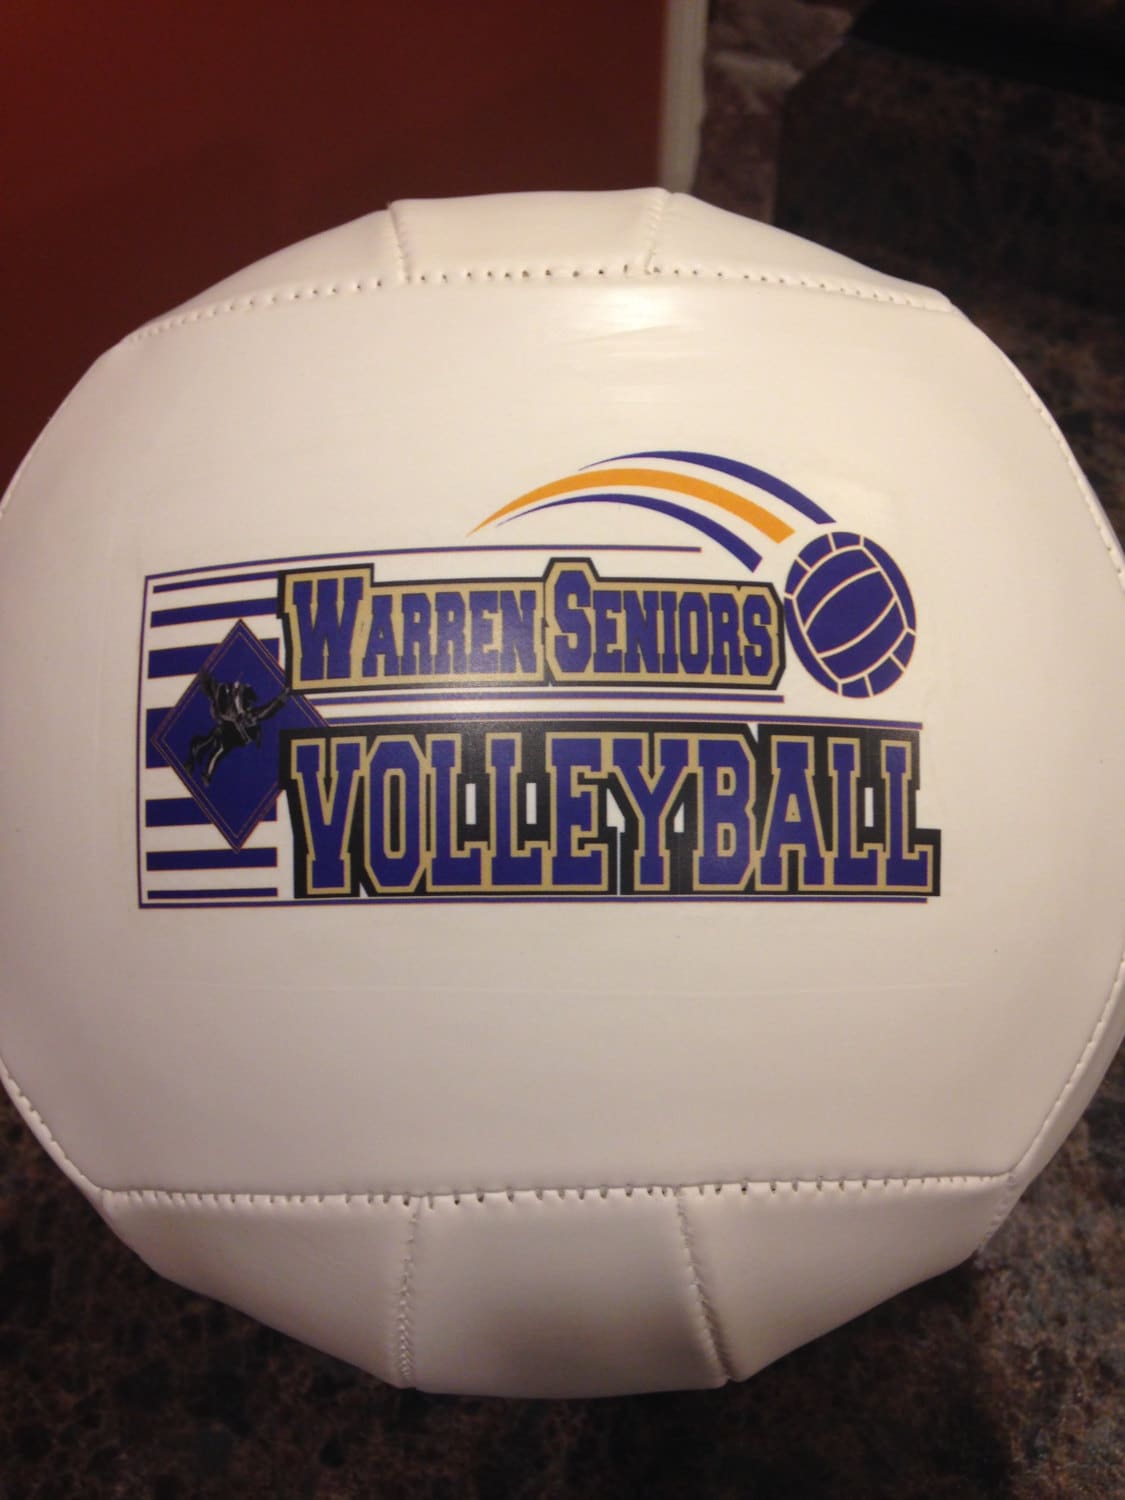 Personalized Custom Regulation Size Volleyballs for Volleyball Coach Gift, Senior Gift, Team Awards Sponsor Gift and Volleyball Player Gift